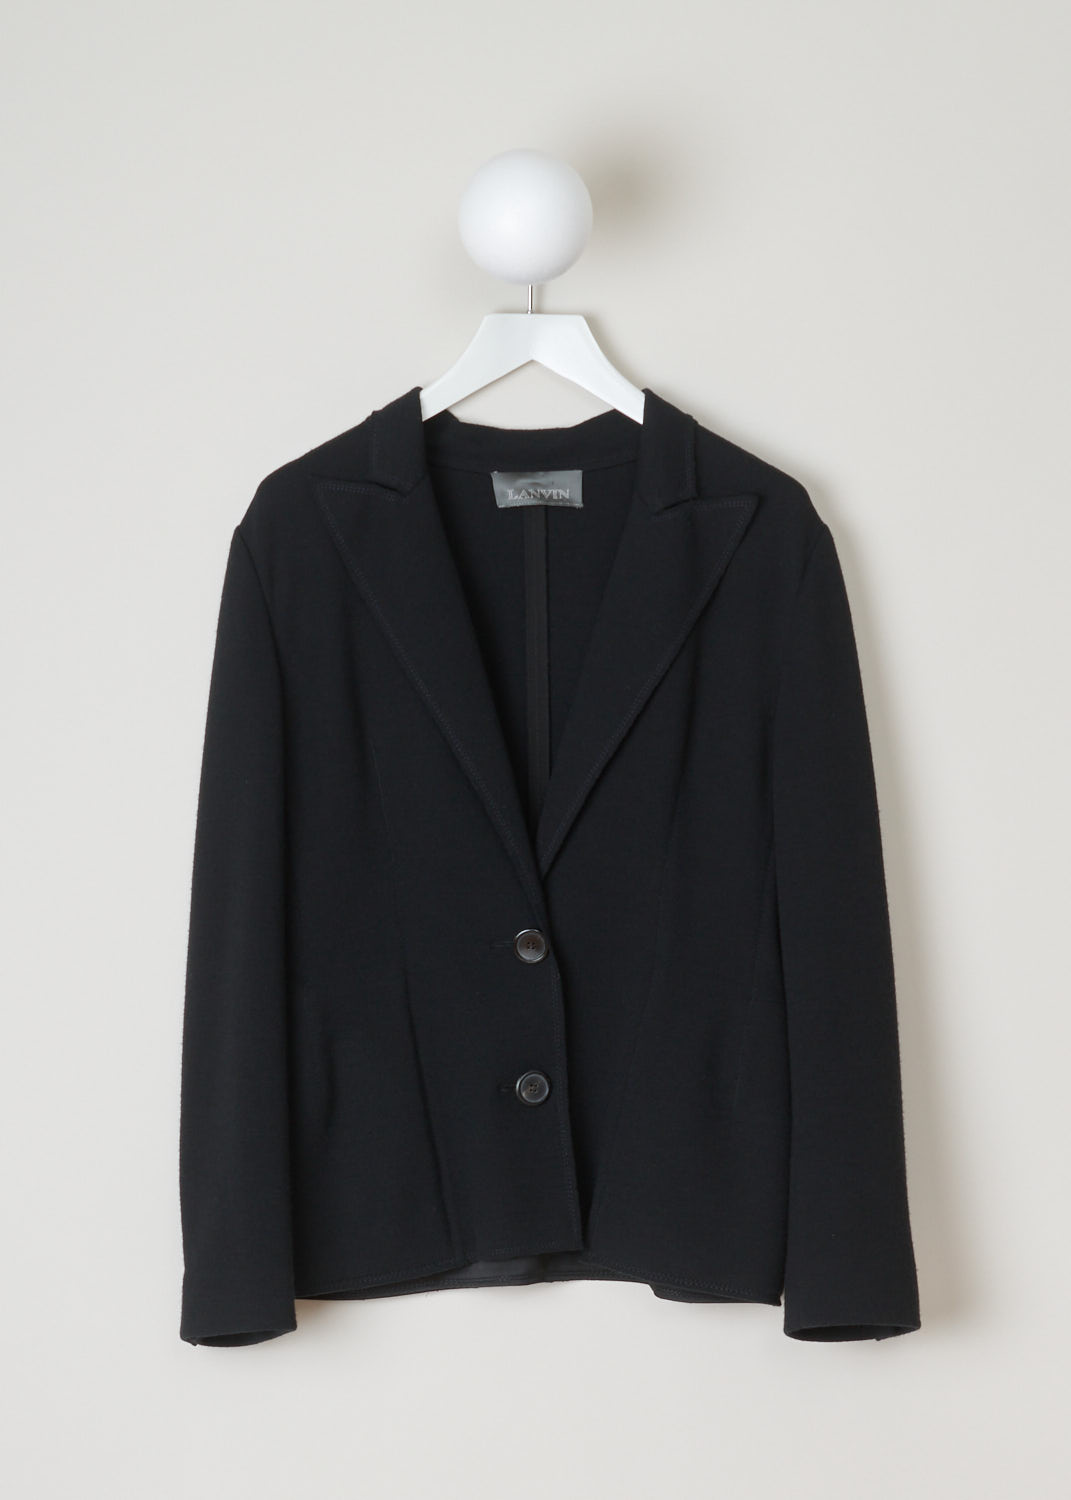 Lanvin, black peak lapel jacket, W07280034P0B_noir_10, black, front, black long sleeve blazer, designed with peak lapels and four buttons on the cuffs. The pockets on this model similar to slip in pockets but with a zipper. 